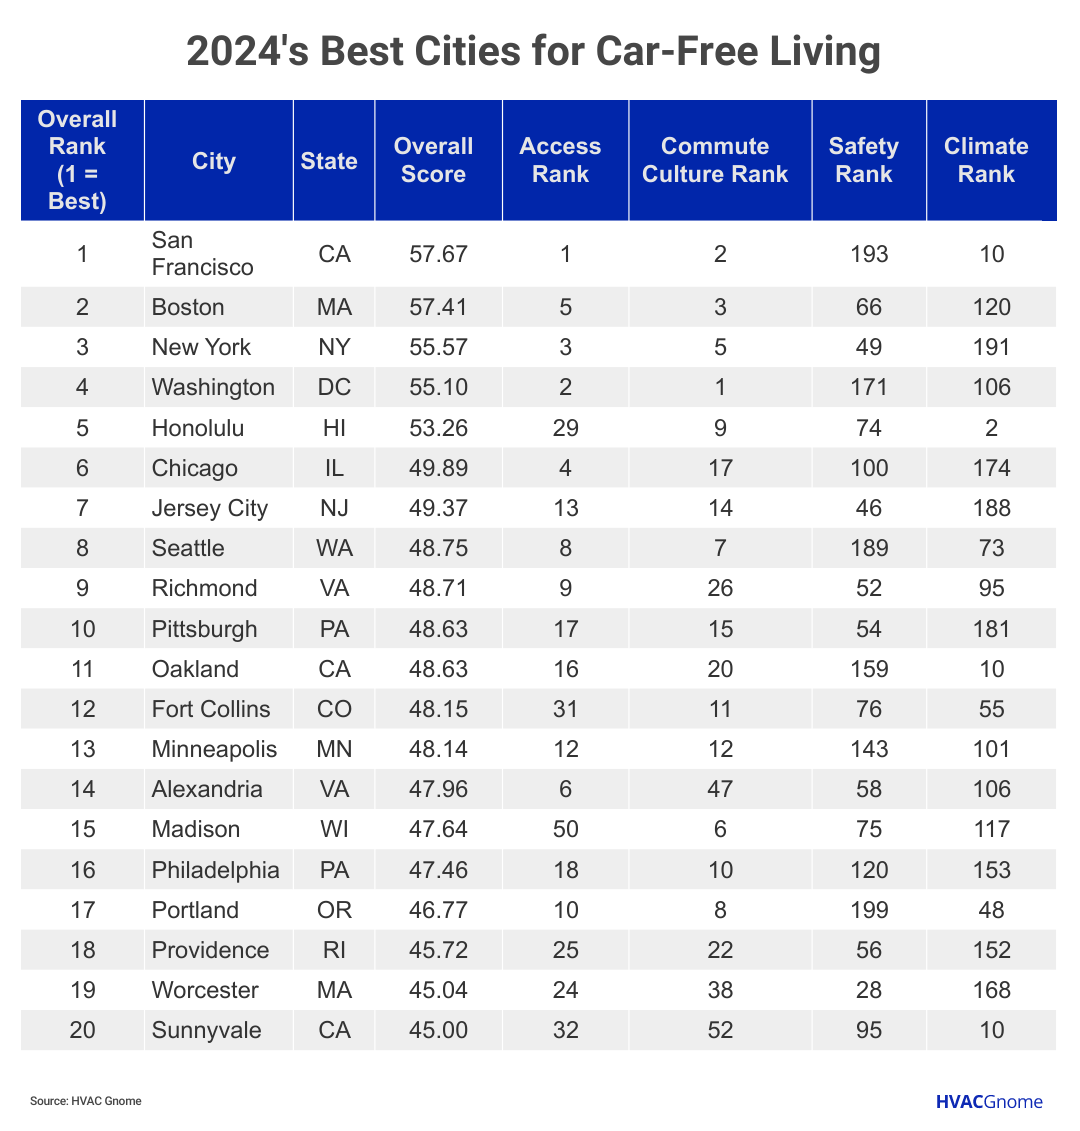 chart showing 2024's Best Cities for Car-Free Living